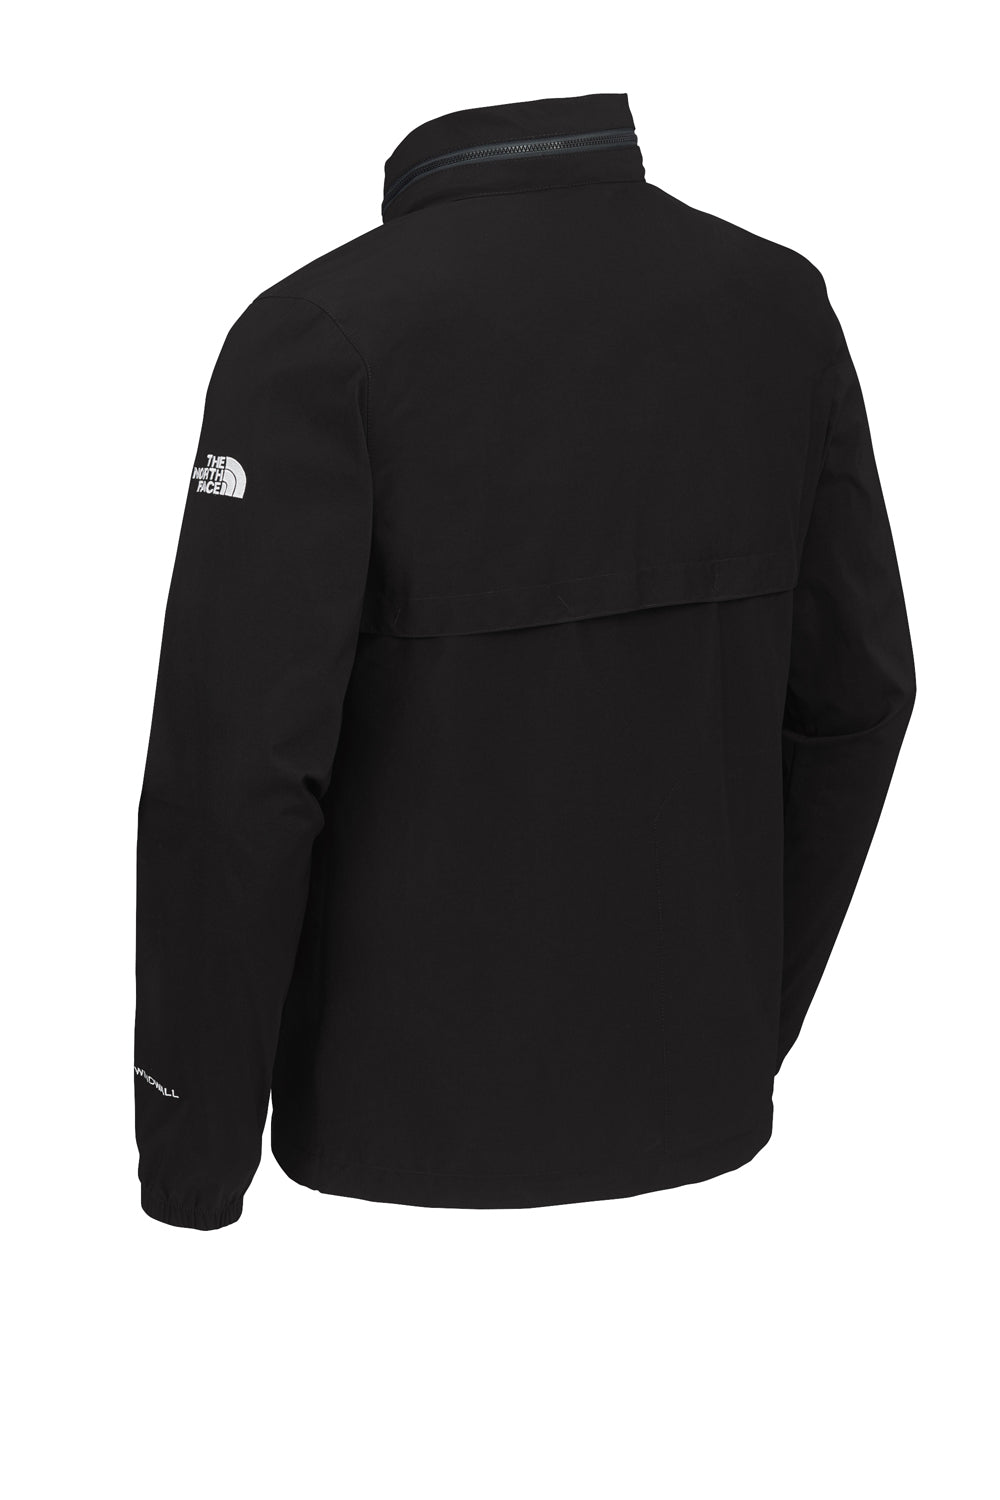 The North Face NF0A5ISG Packable Travel Full Zip Jacket Black Flat Back